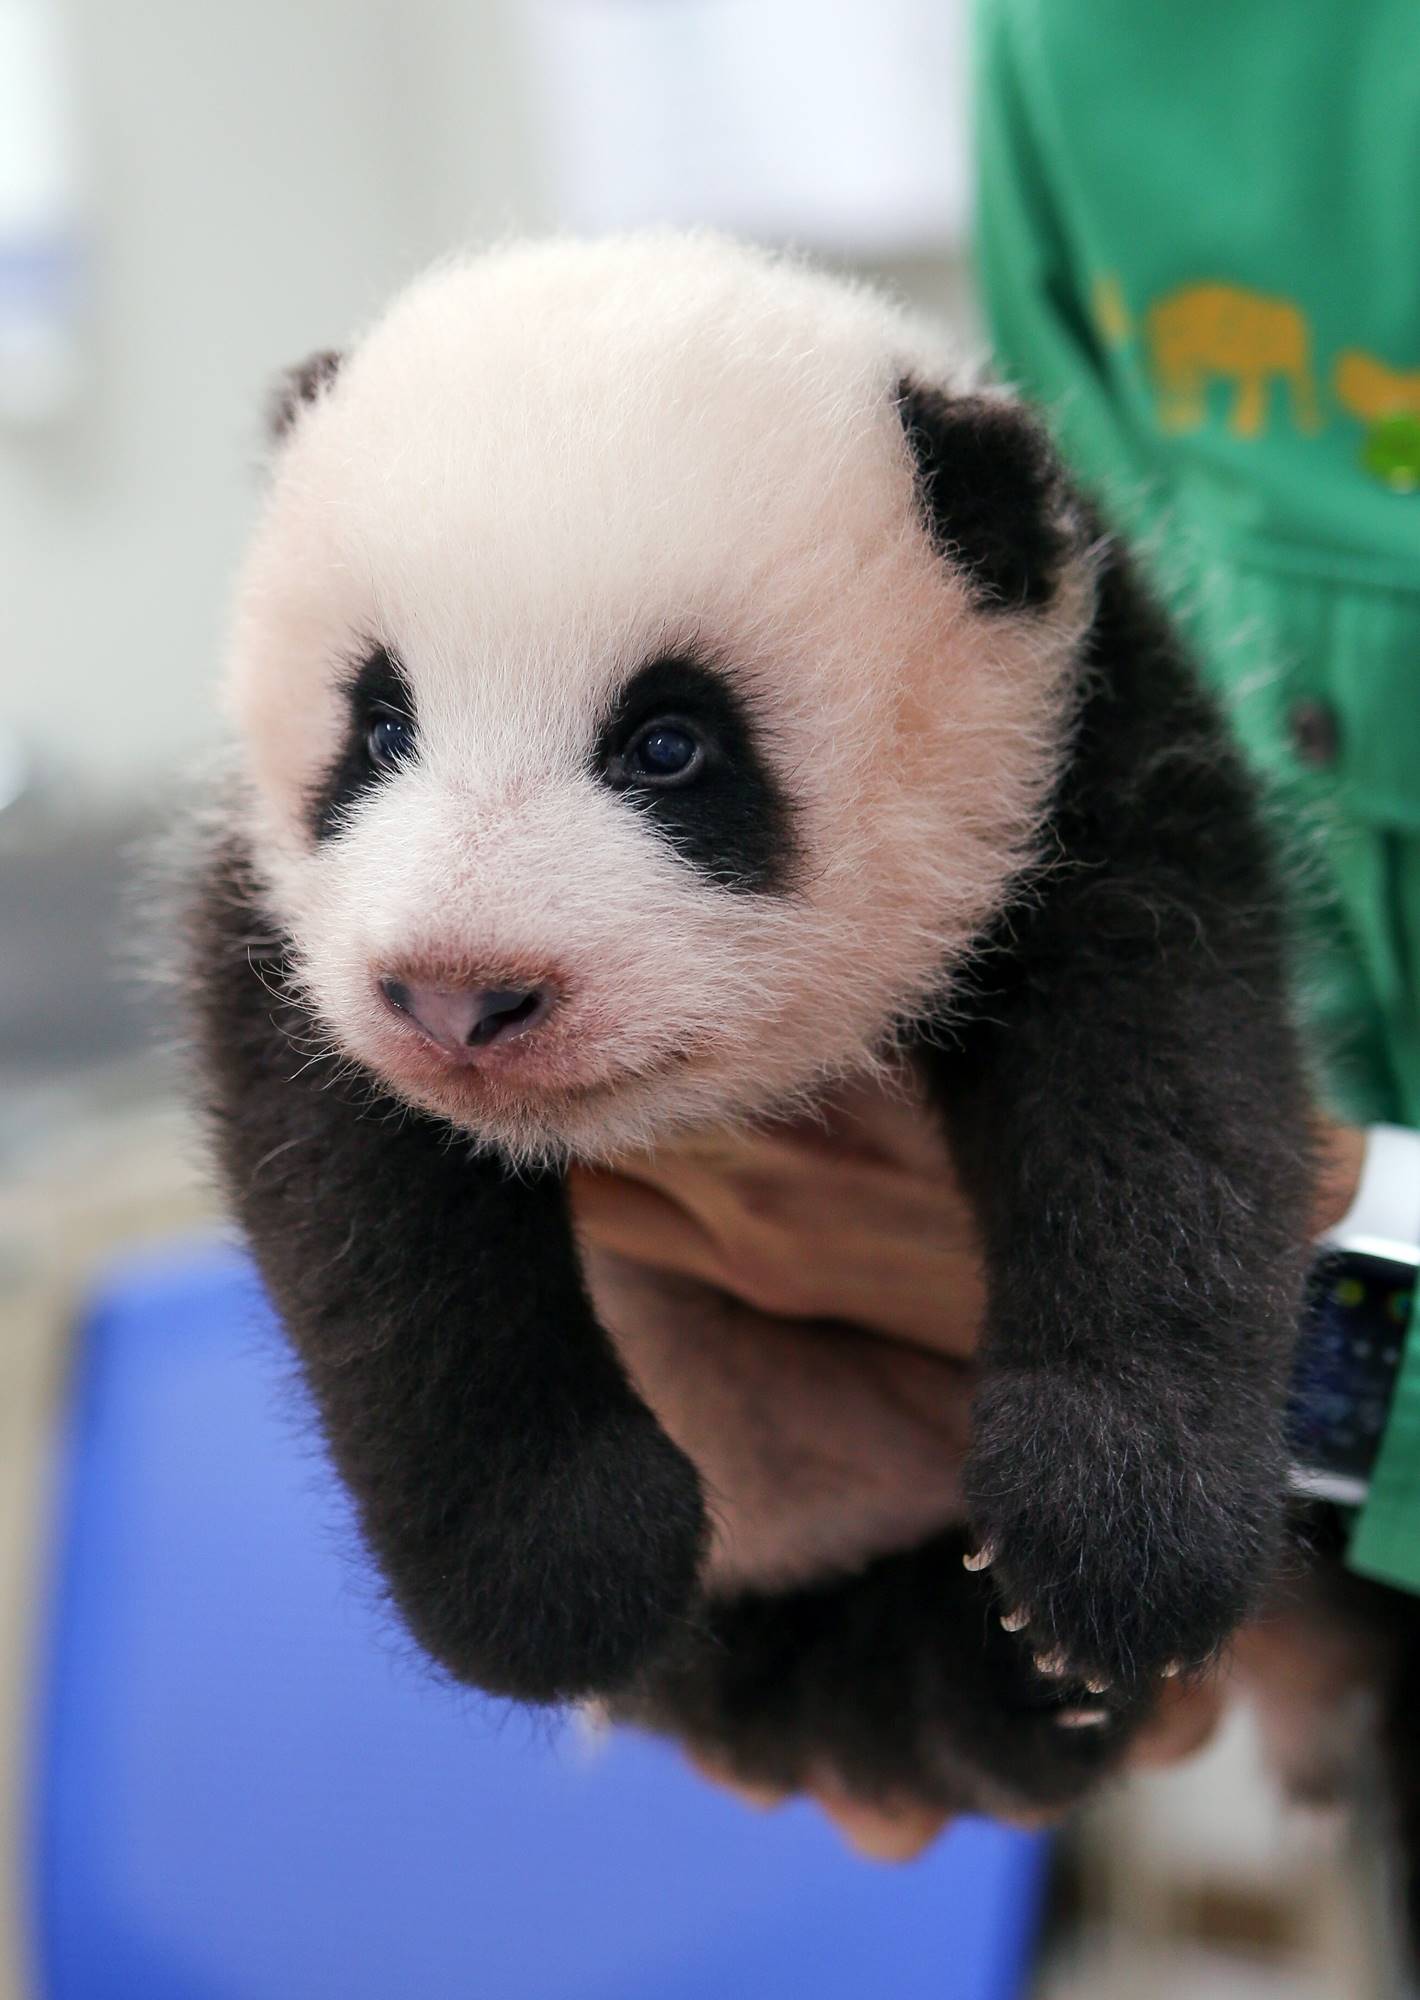 Fu Bao at just a couple of months old.